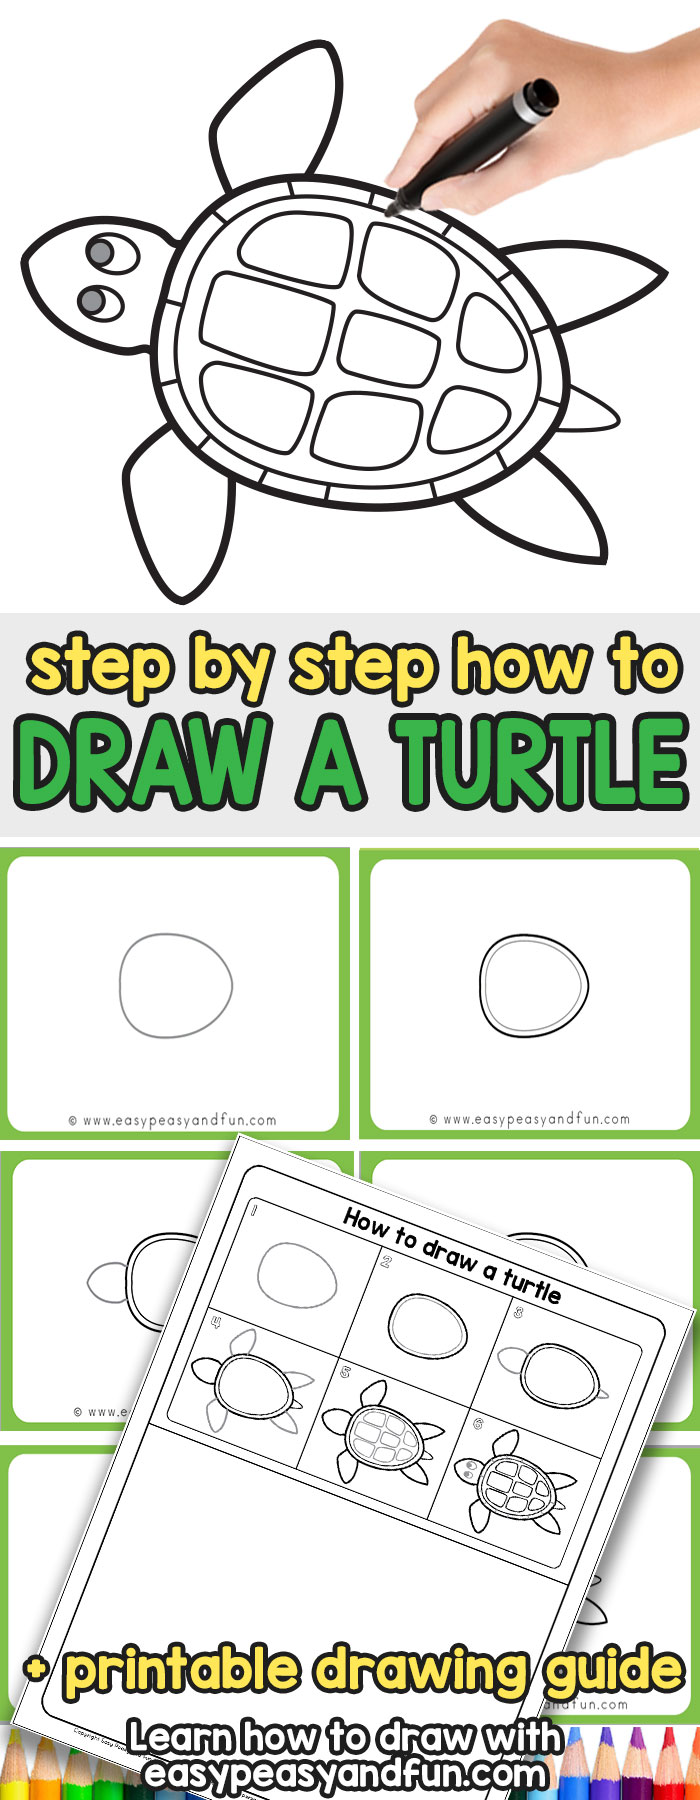 How to Draw a Turtle step by step tutorial for kids and beginners